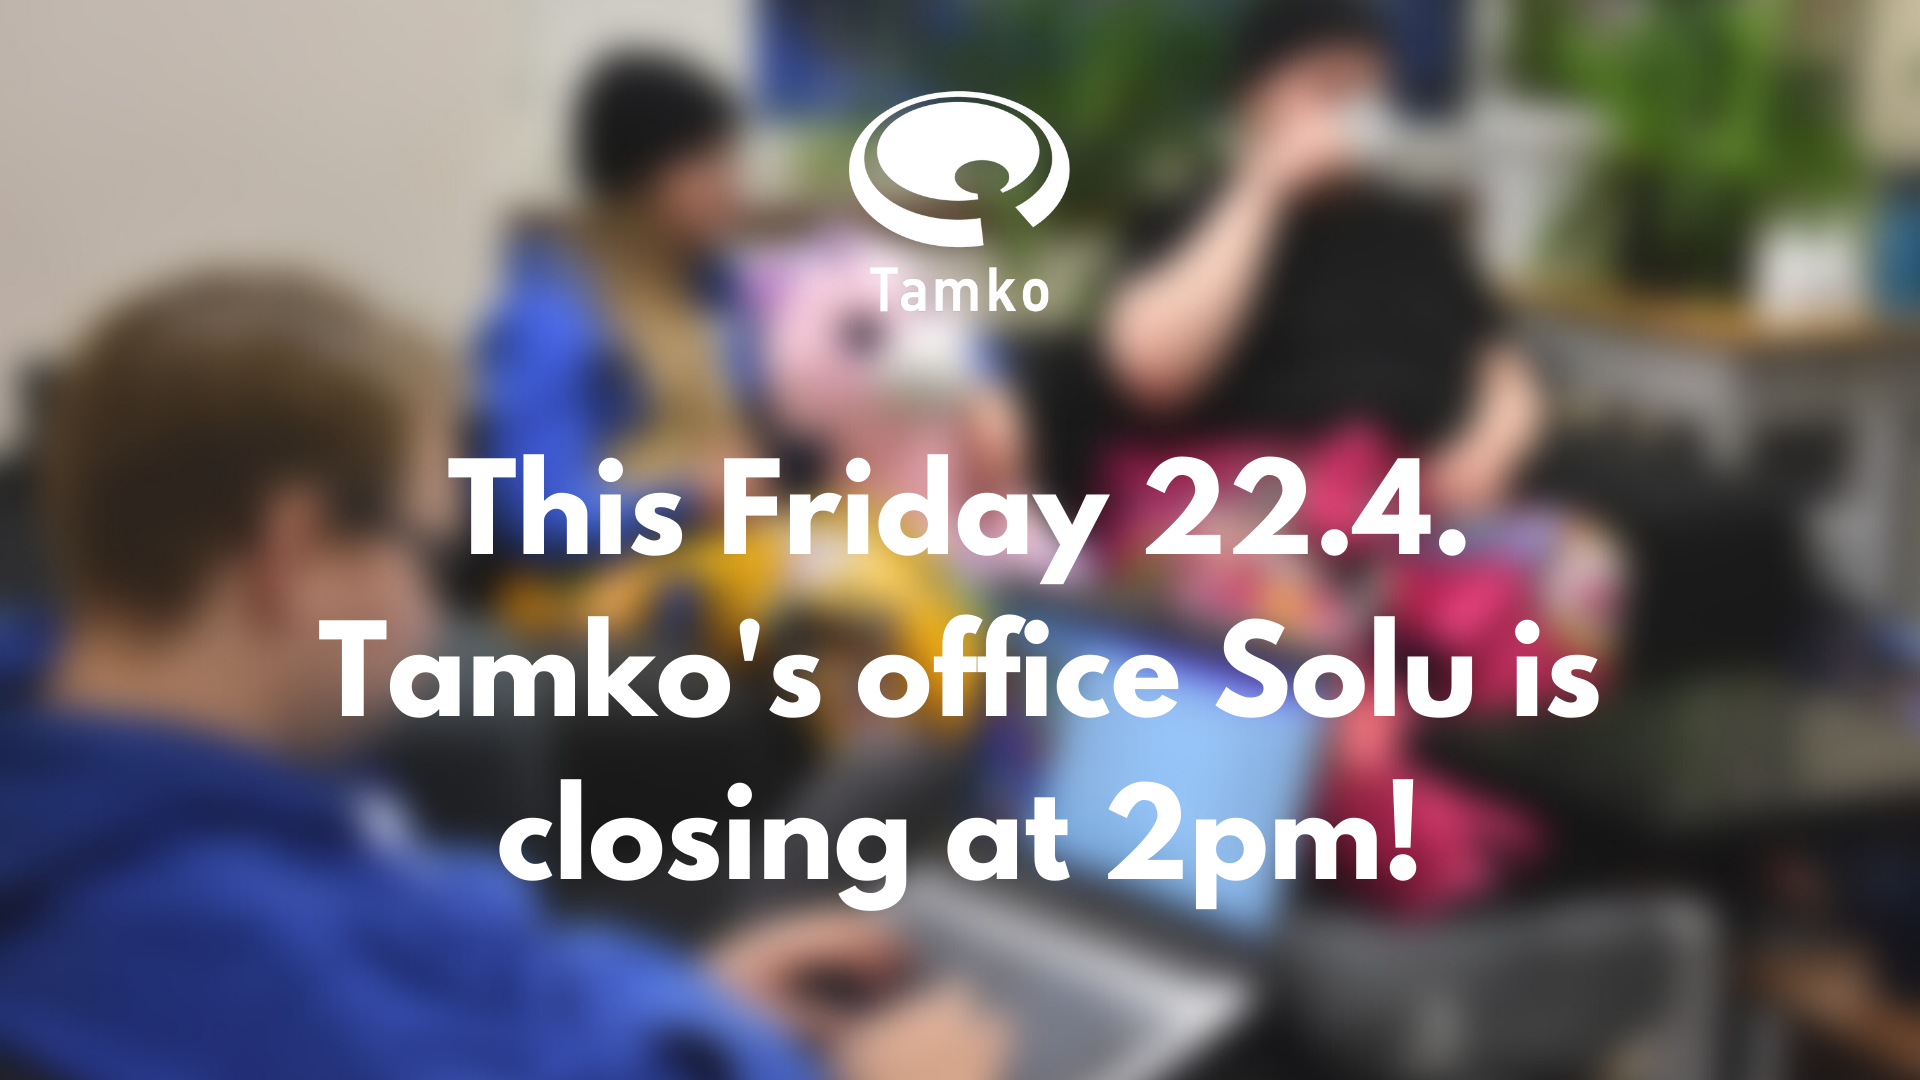 Tamko’s office is closing at 2pm this Friday